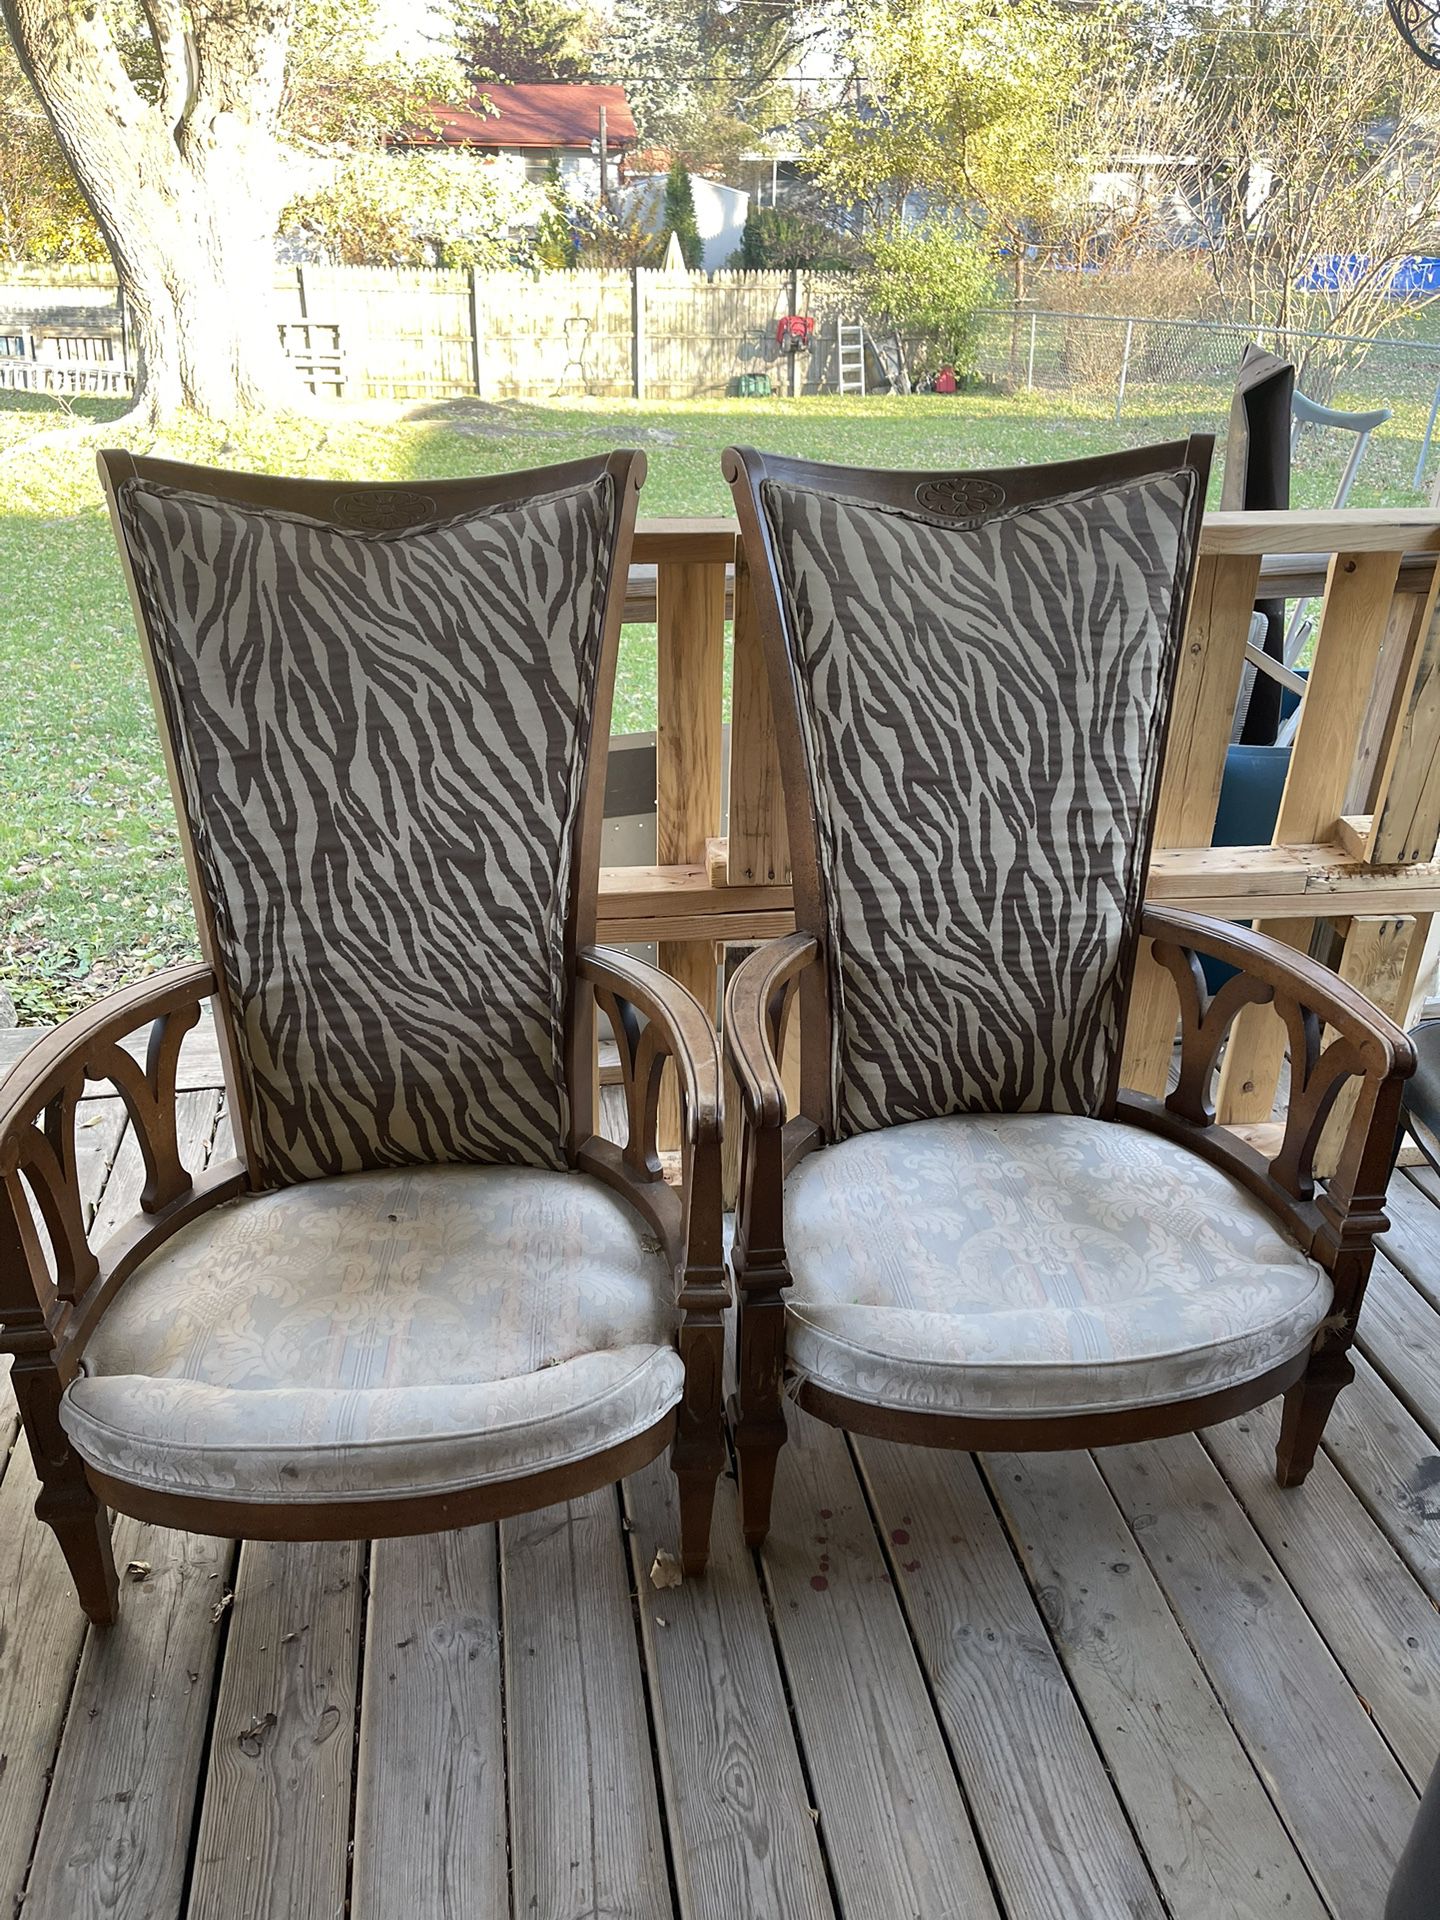 Living Room Chairs (Project Chairs)